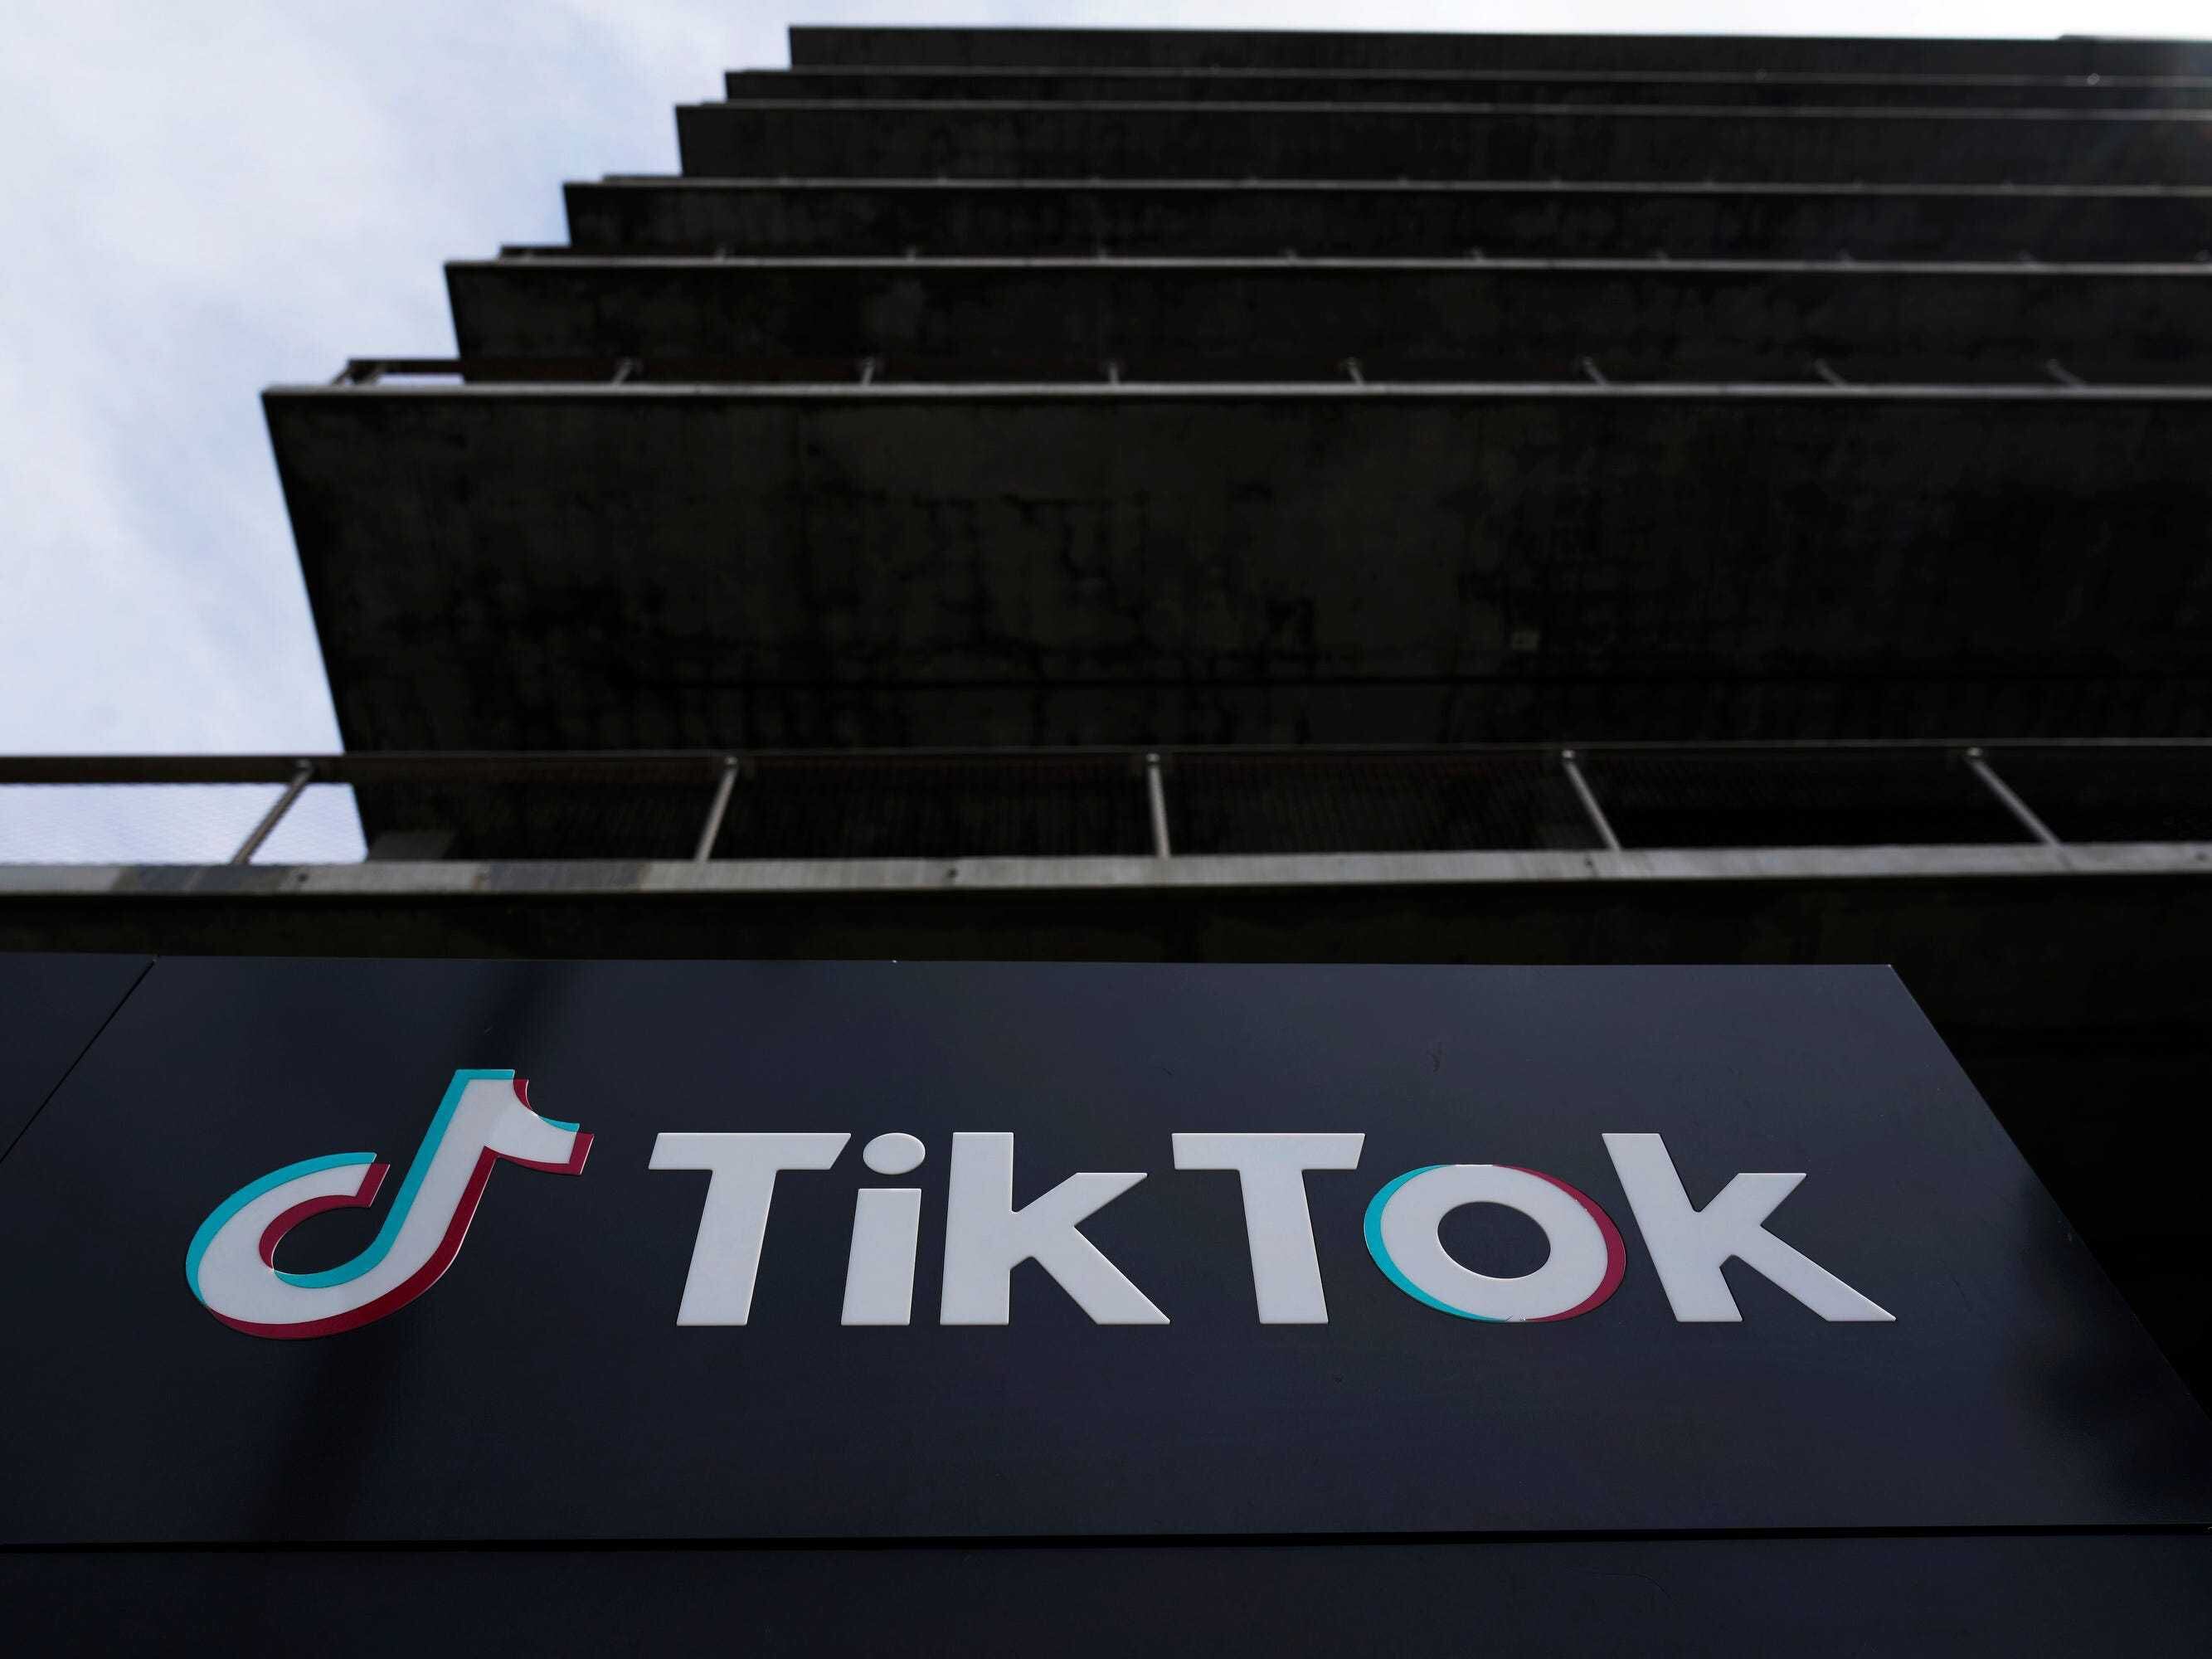 US lawmakers pass legislation to ban TikTok within a year